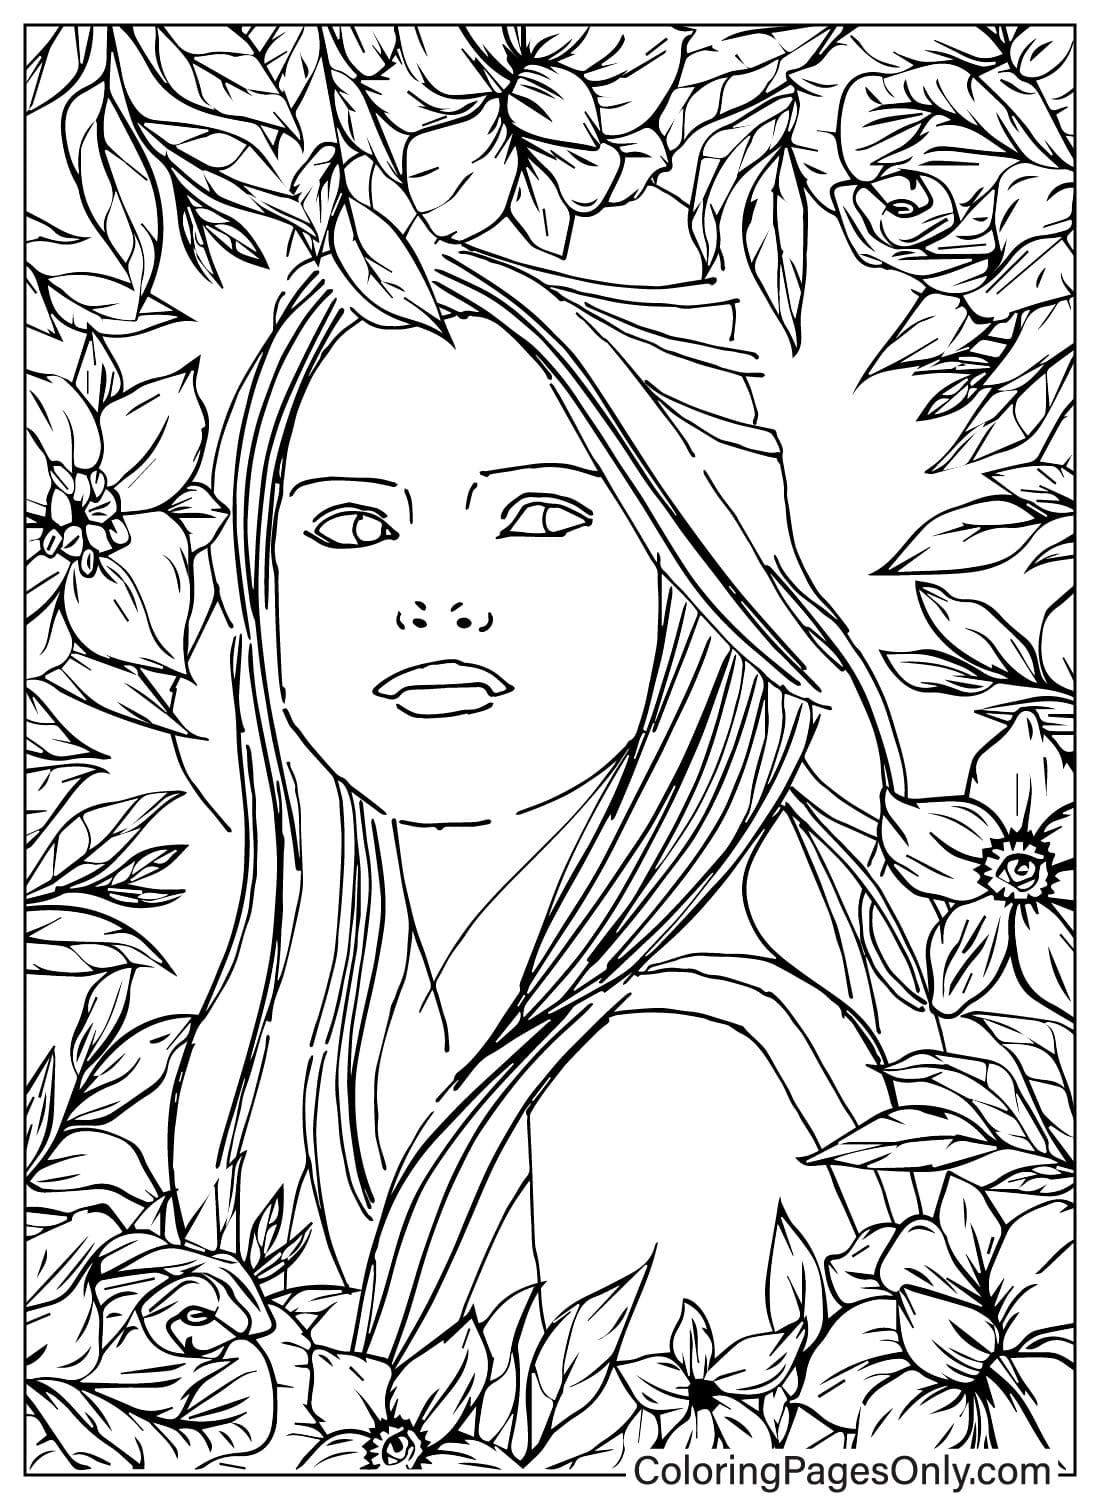 Selena Gomez and Flower Coloring Page from Selena Gomez